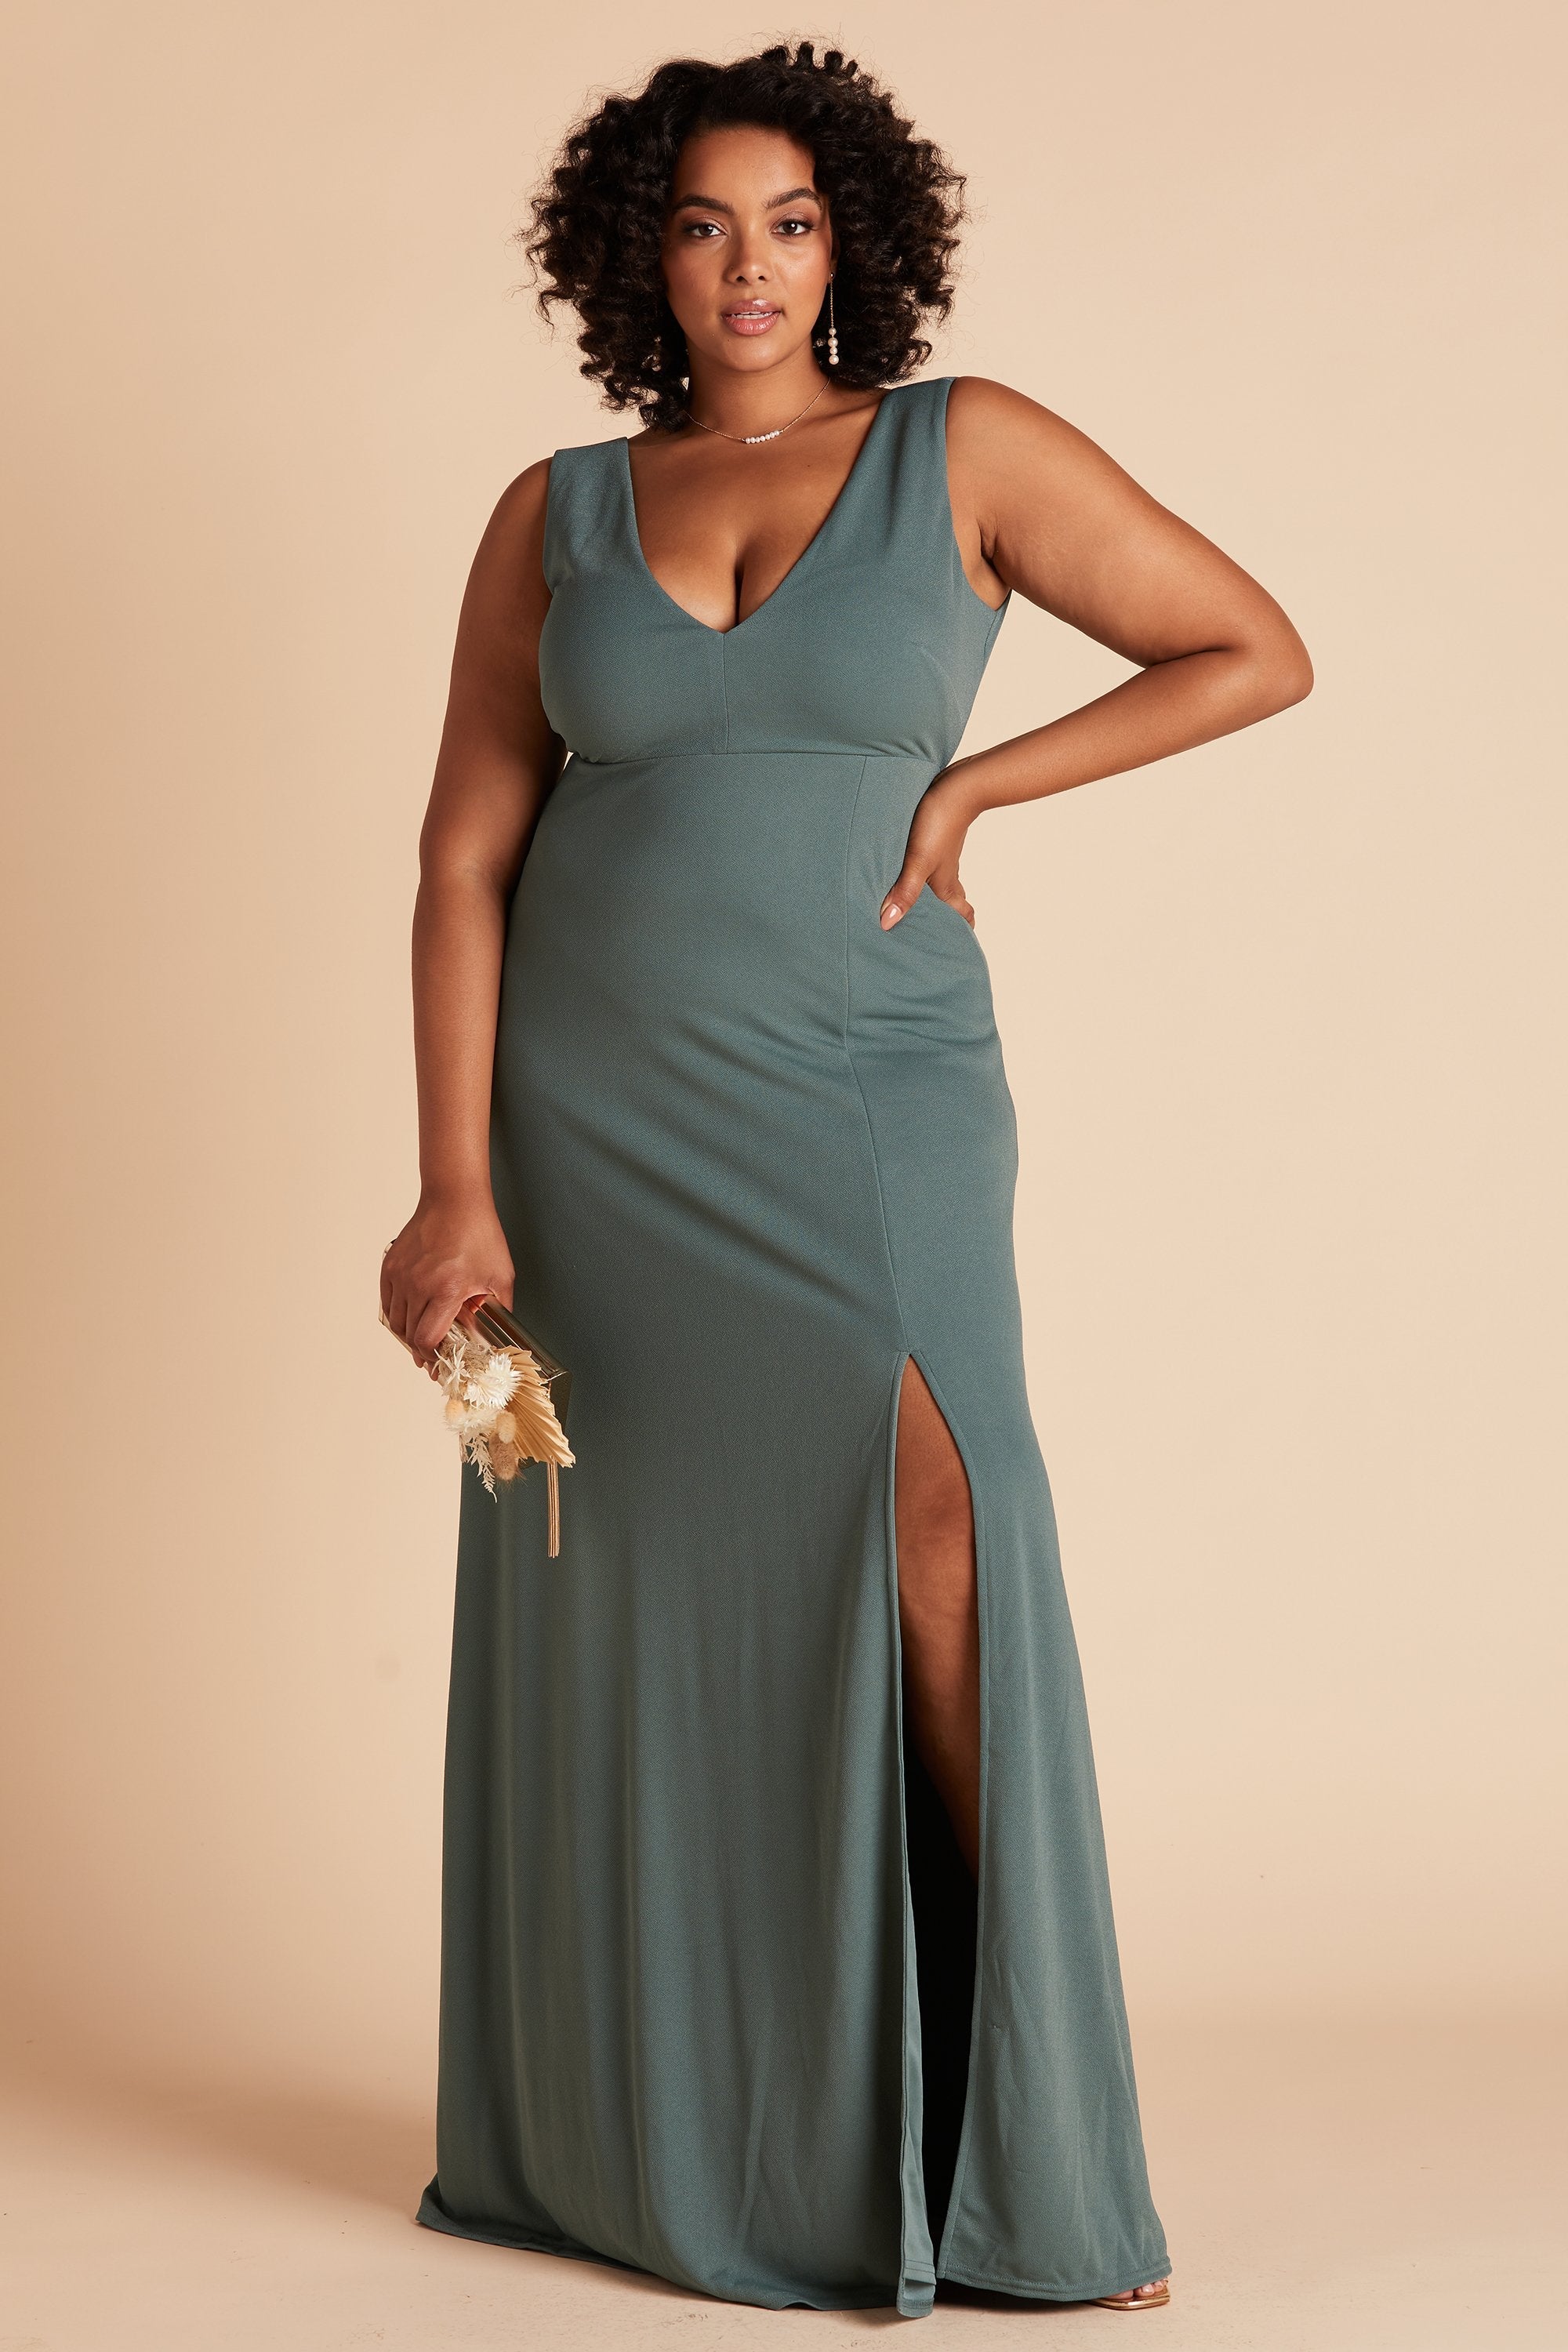 Shamin plus size bridesmaid dress with slit in sea glass green chiffon by Birdy Grey, front view